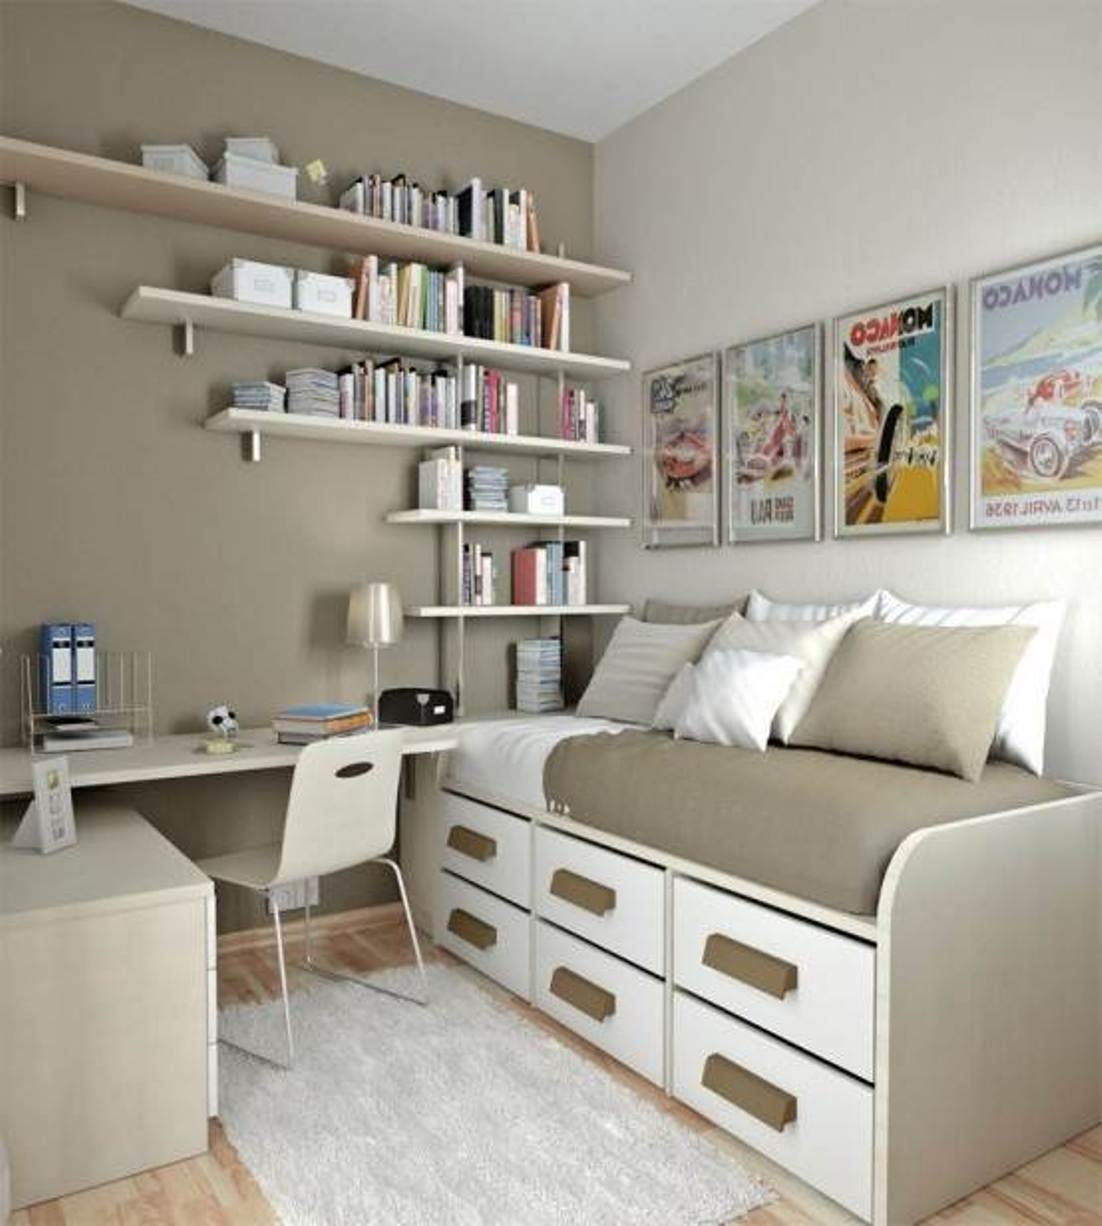 Space saving Furniture Solutions